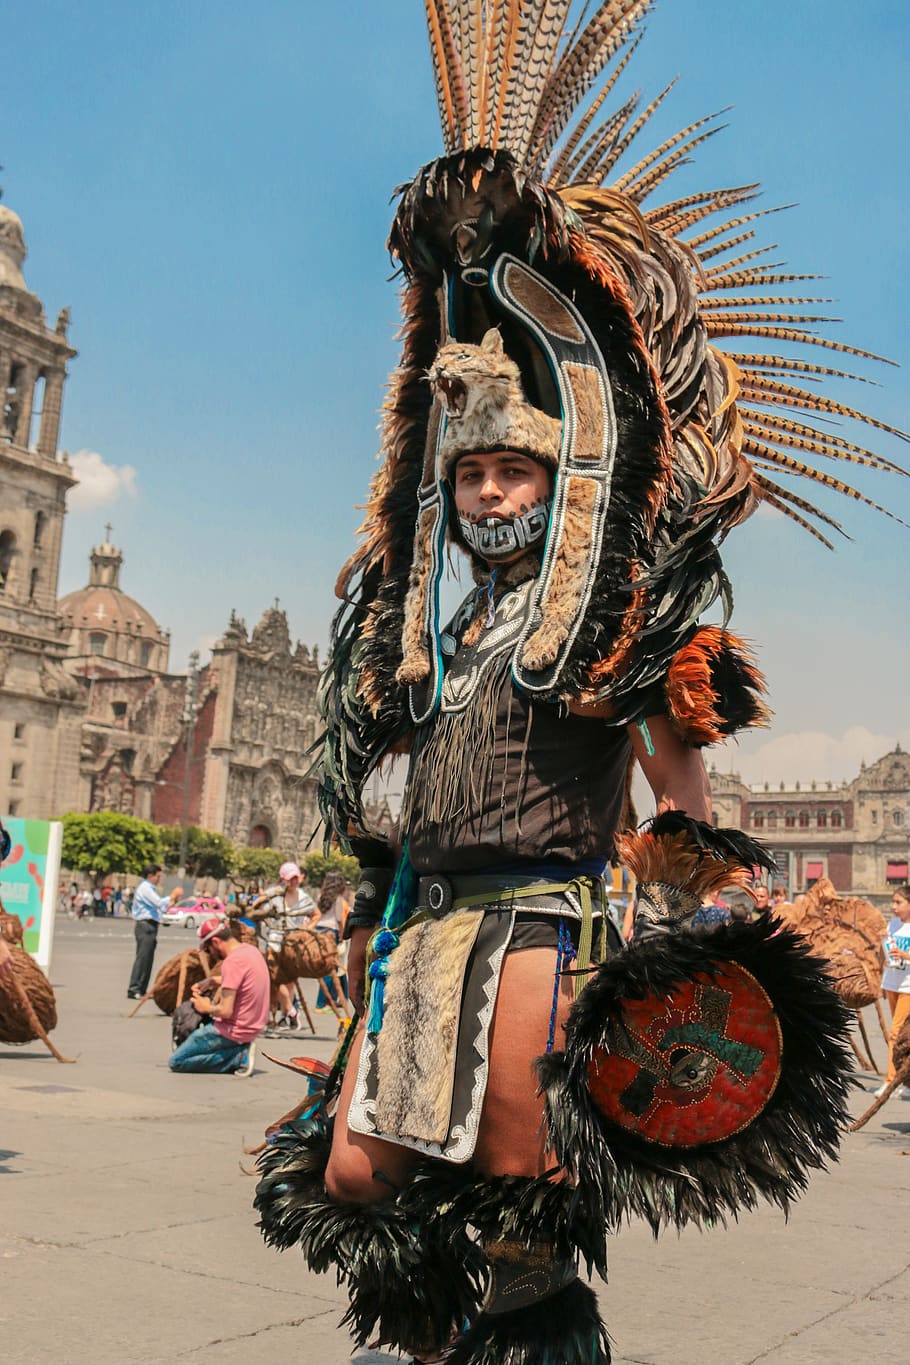 people, costume, dancer, travel, traditional, portrait, mexico city, man, real people, architecture